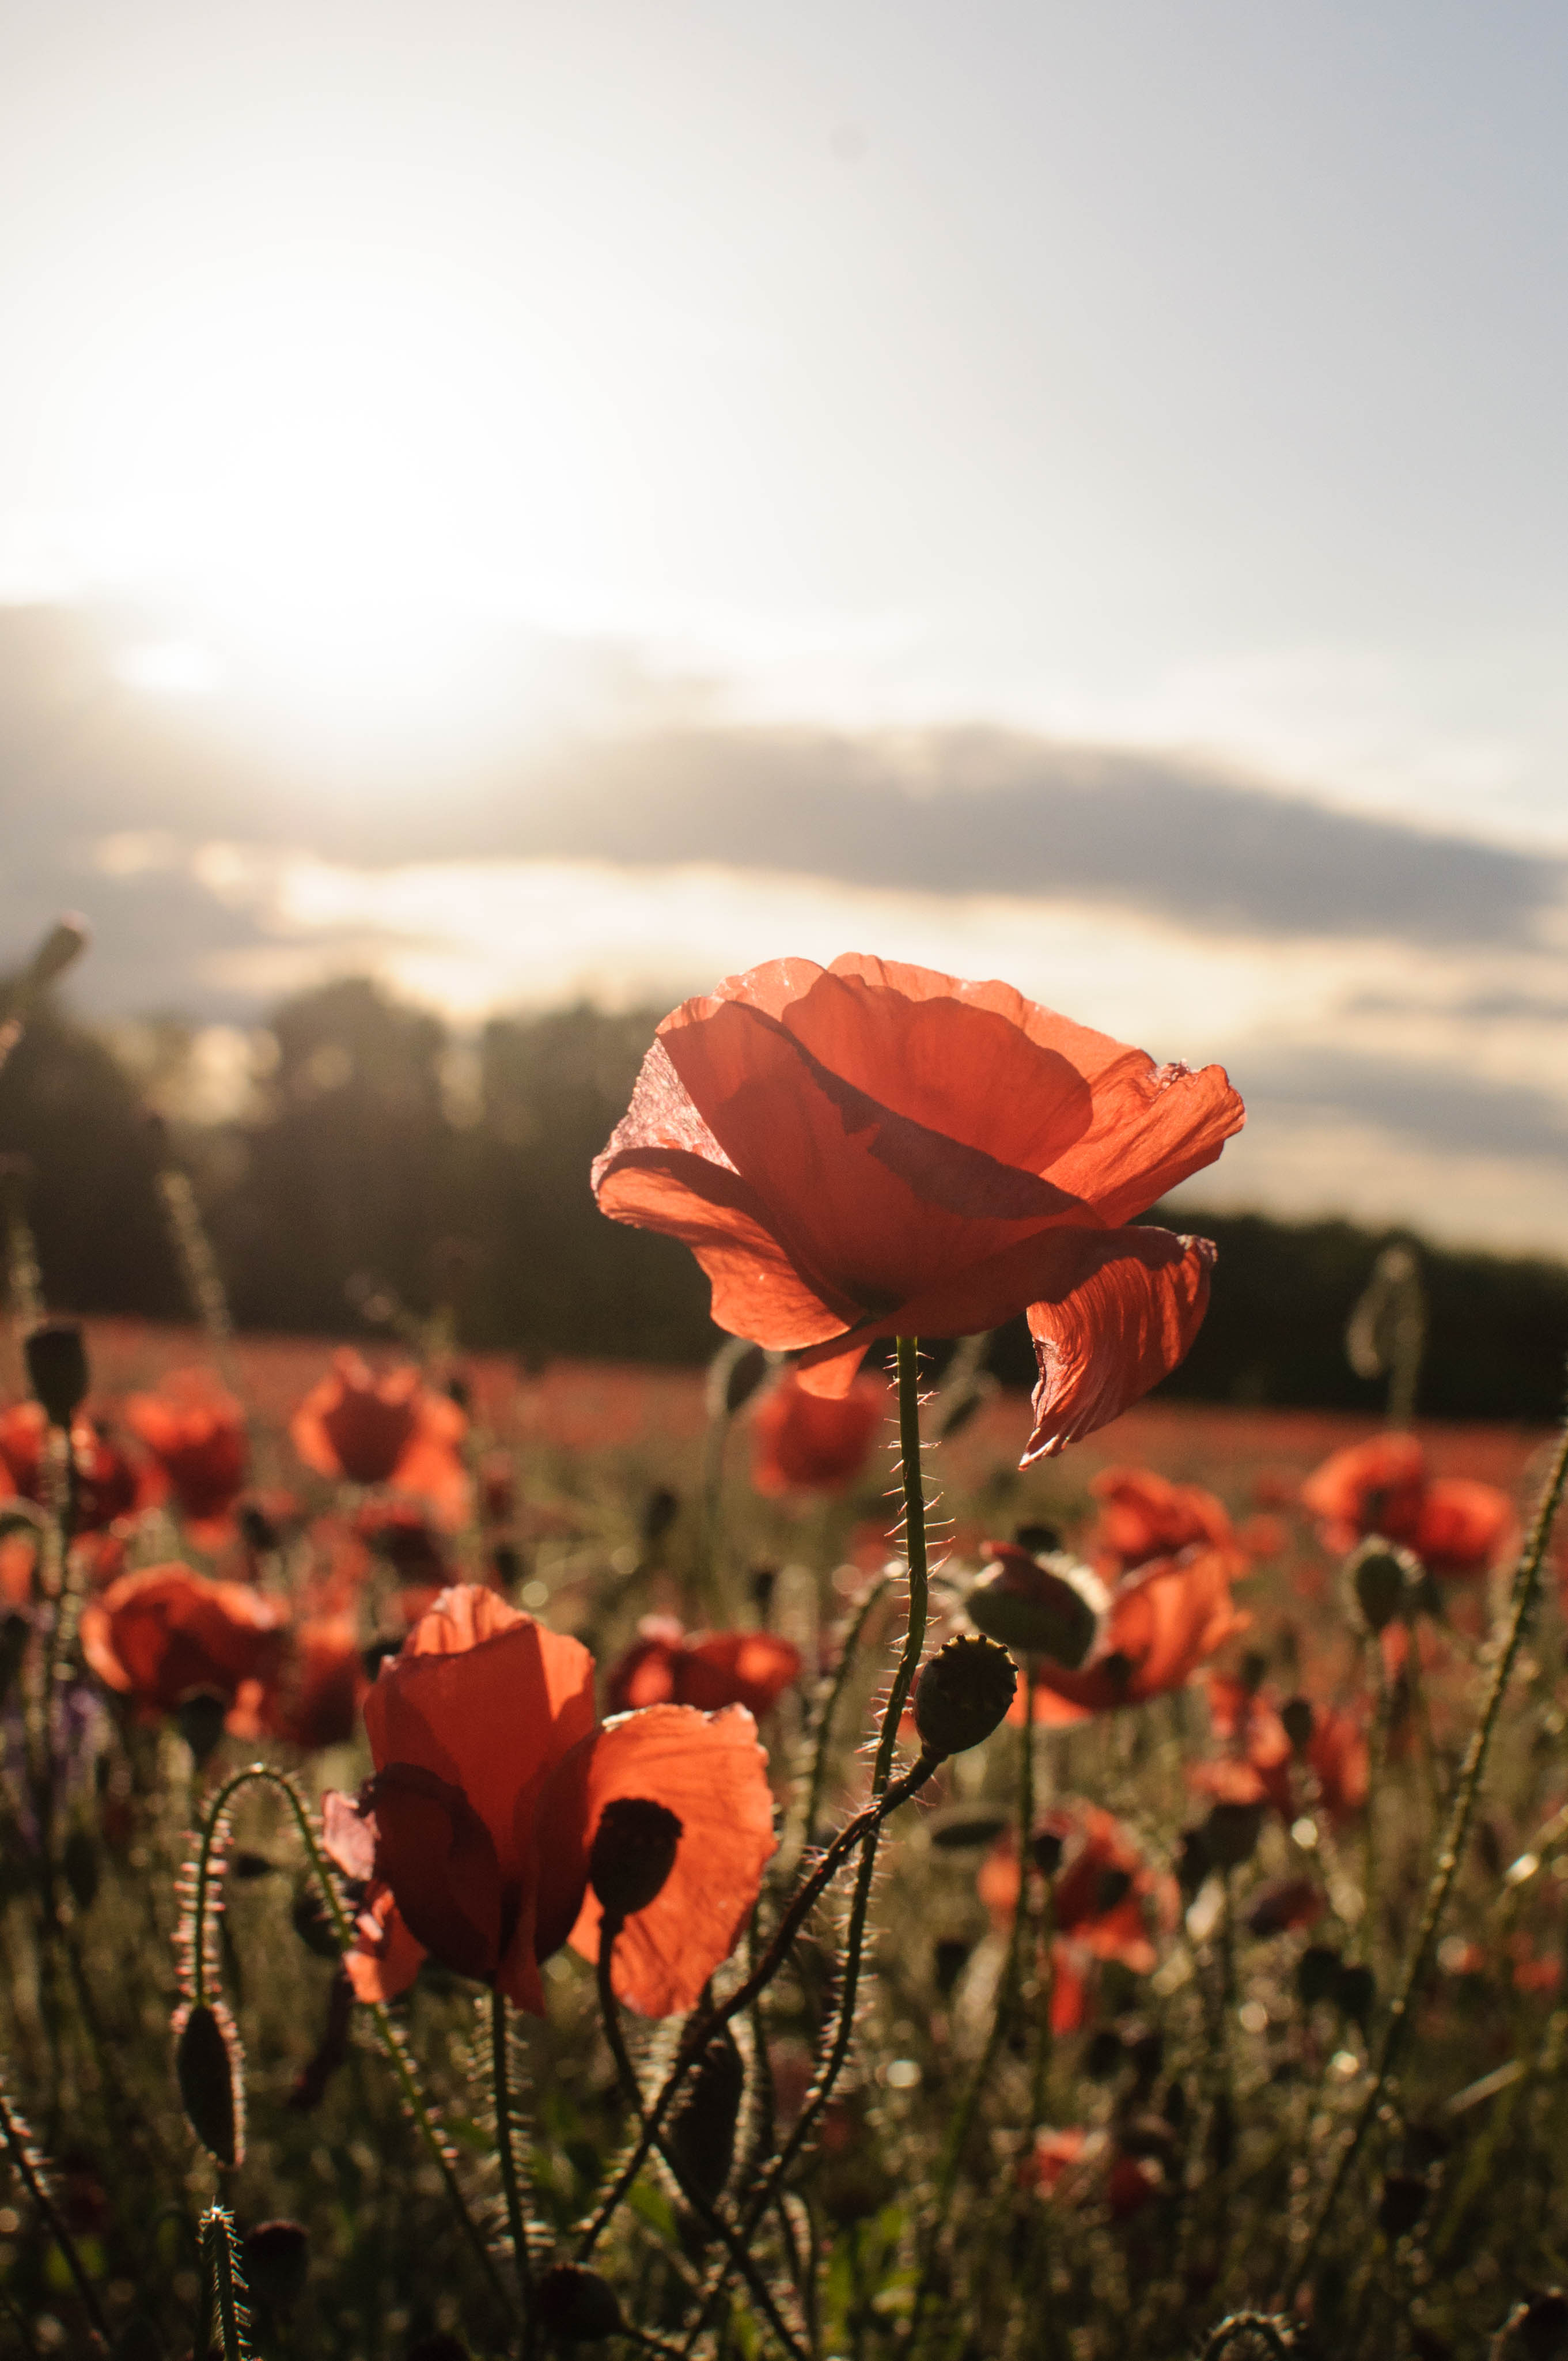 Download background flowers, poppies, red, field, sunlight